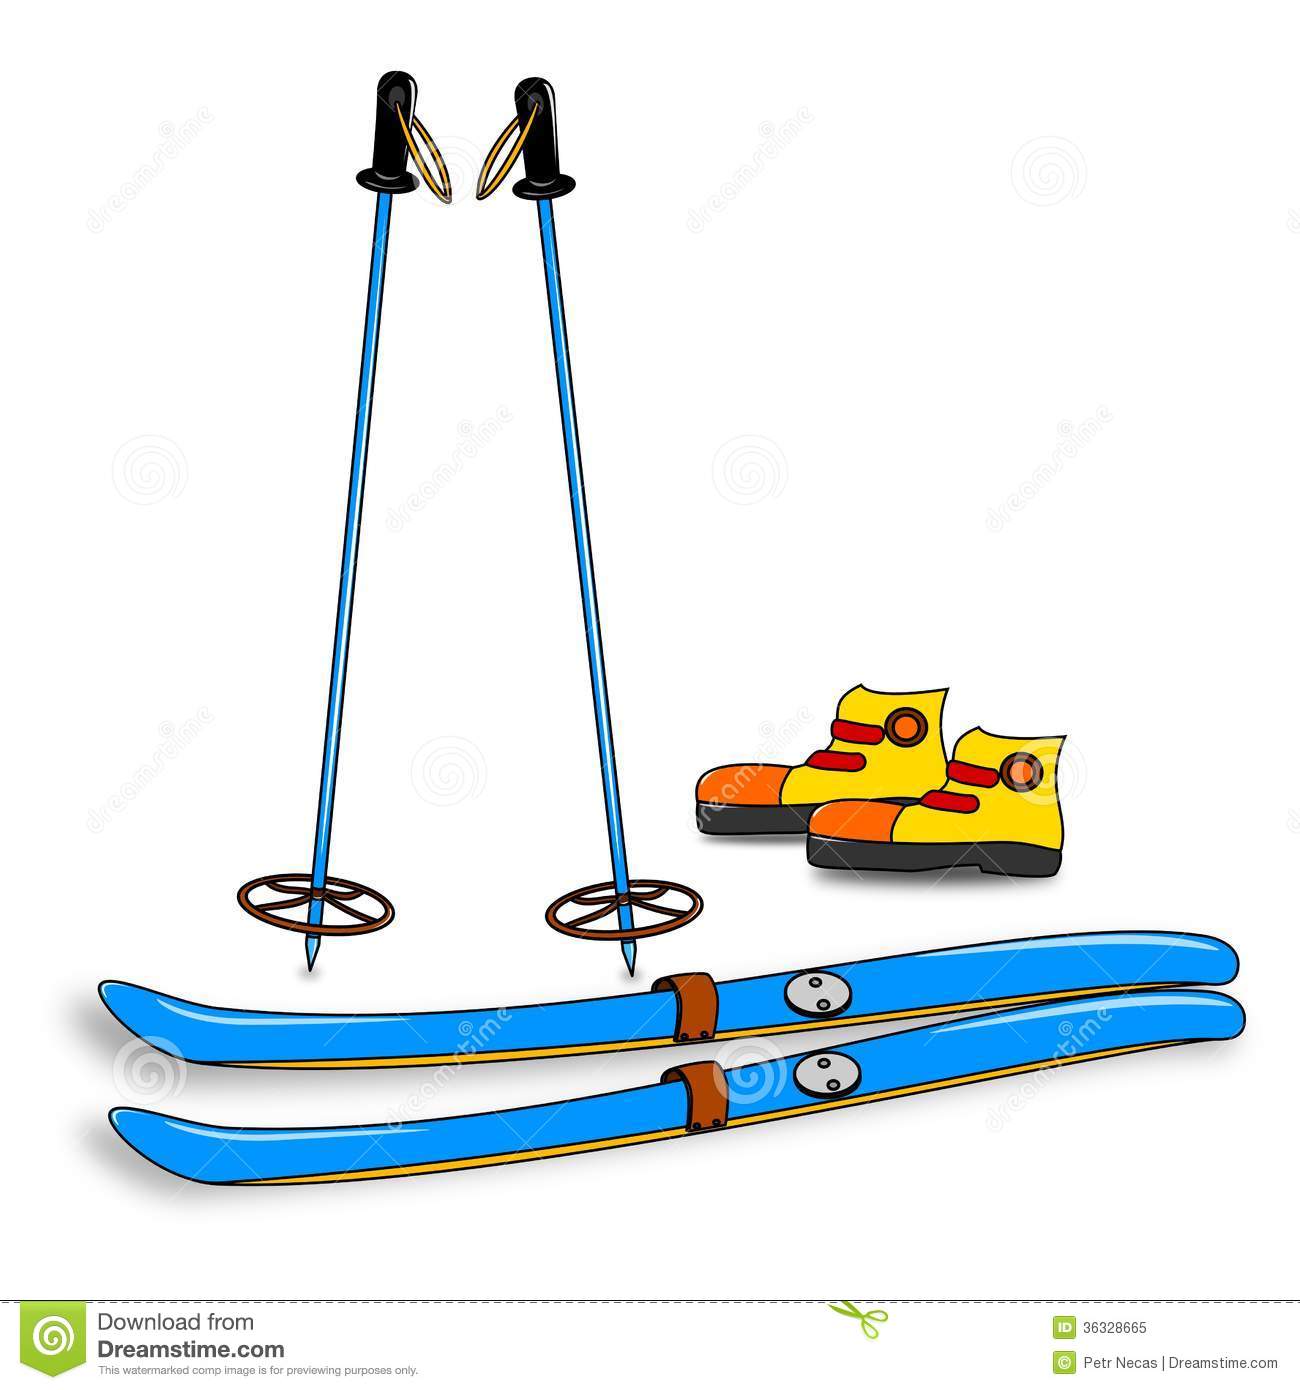 Equipment For Skiers   Skis Boots Poles Royalty Free Stock Photo    